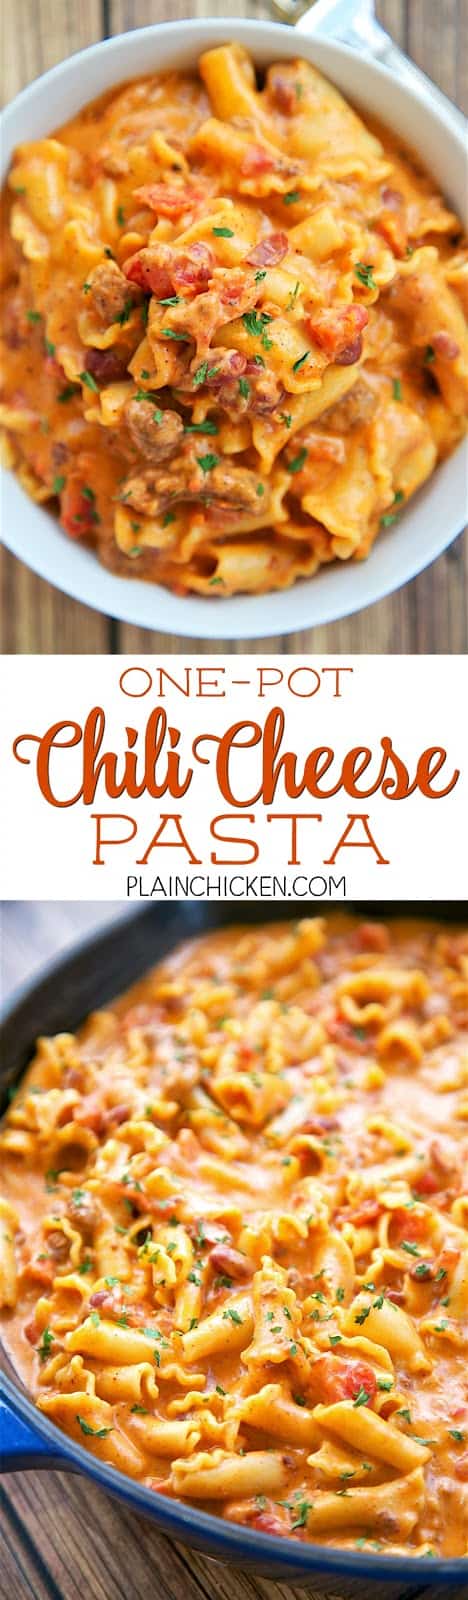 One Pot Chili Cheese Pasta - everything cooks in the same skillet, even the pasta!! Canned chili, cream cheese, diced tomatoes, chicken broth, pasta, garlic, chili powder and cheddar cheese. Everyone cleaned their plate! So quick and easy to make. Ready in under 20 minutes!